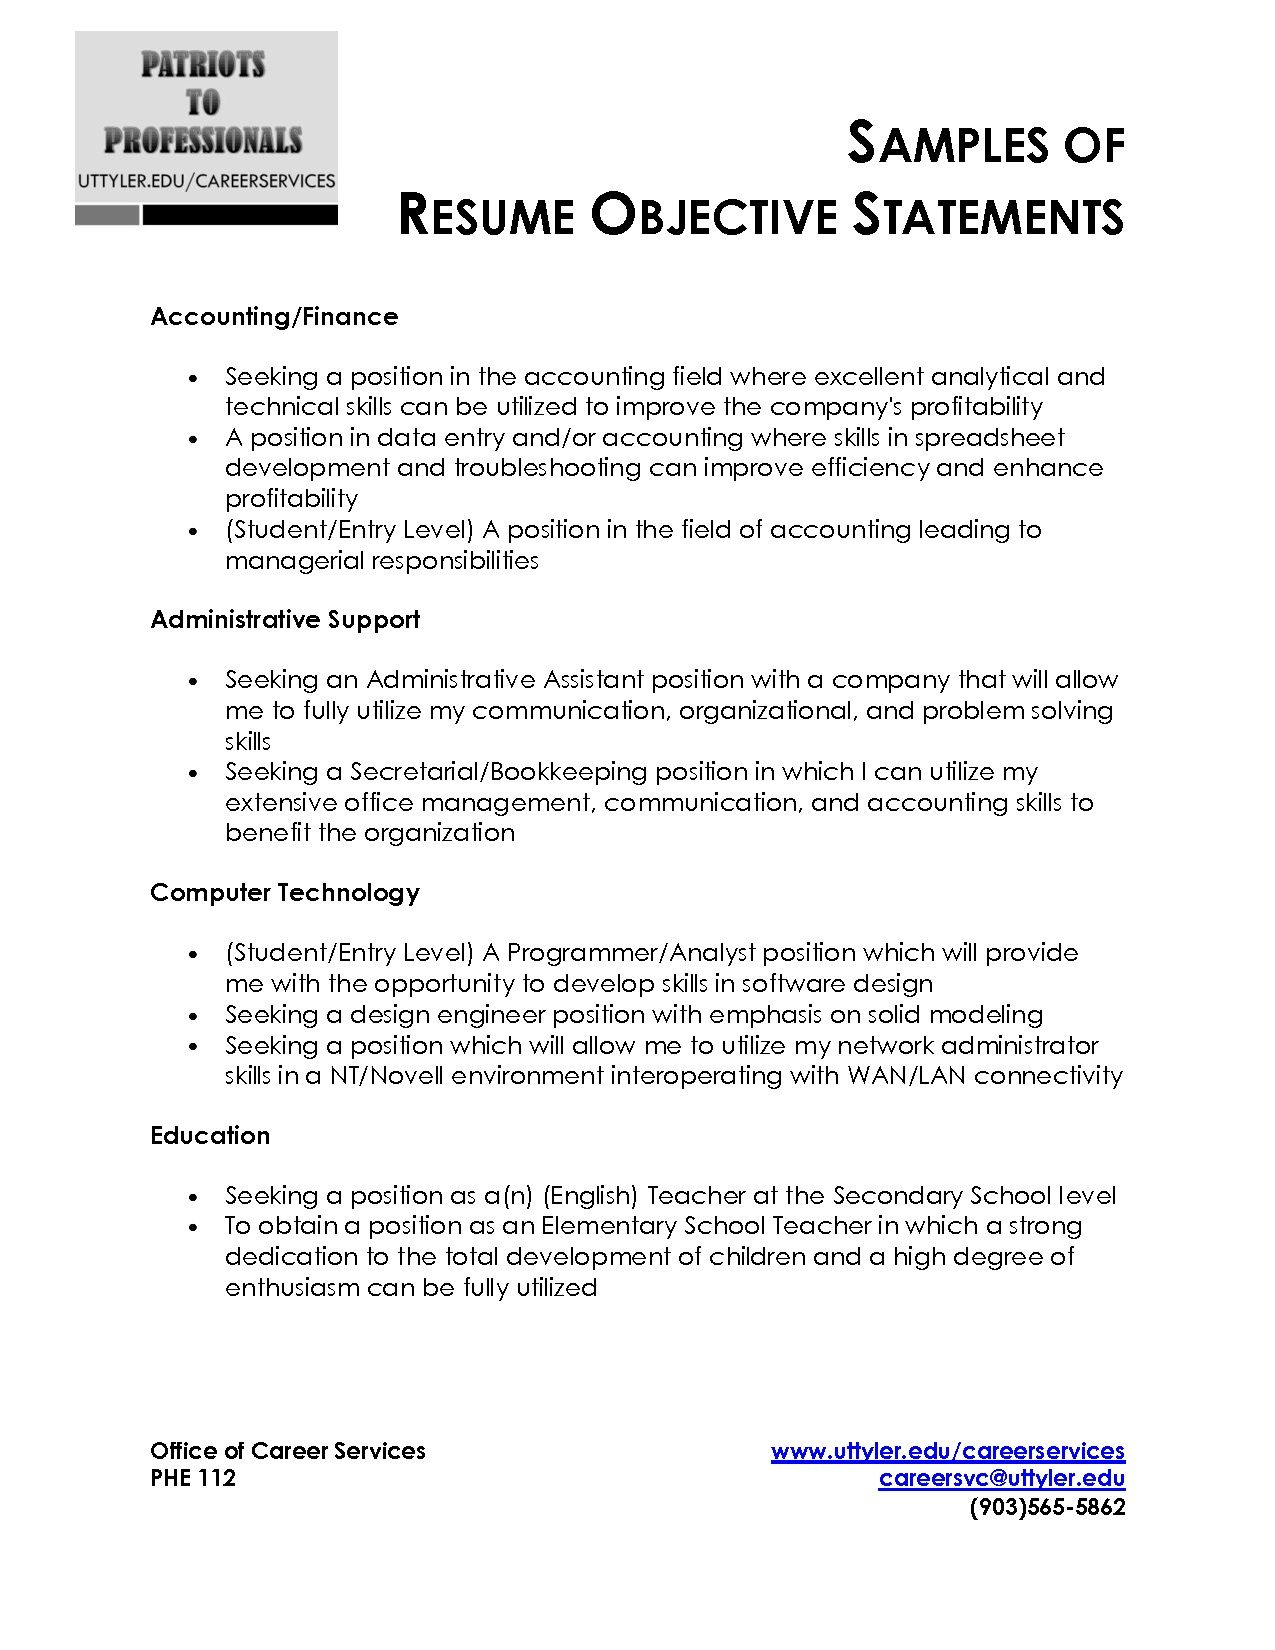 Examples of great resume objective statements